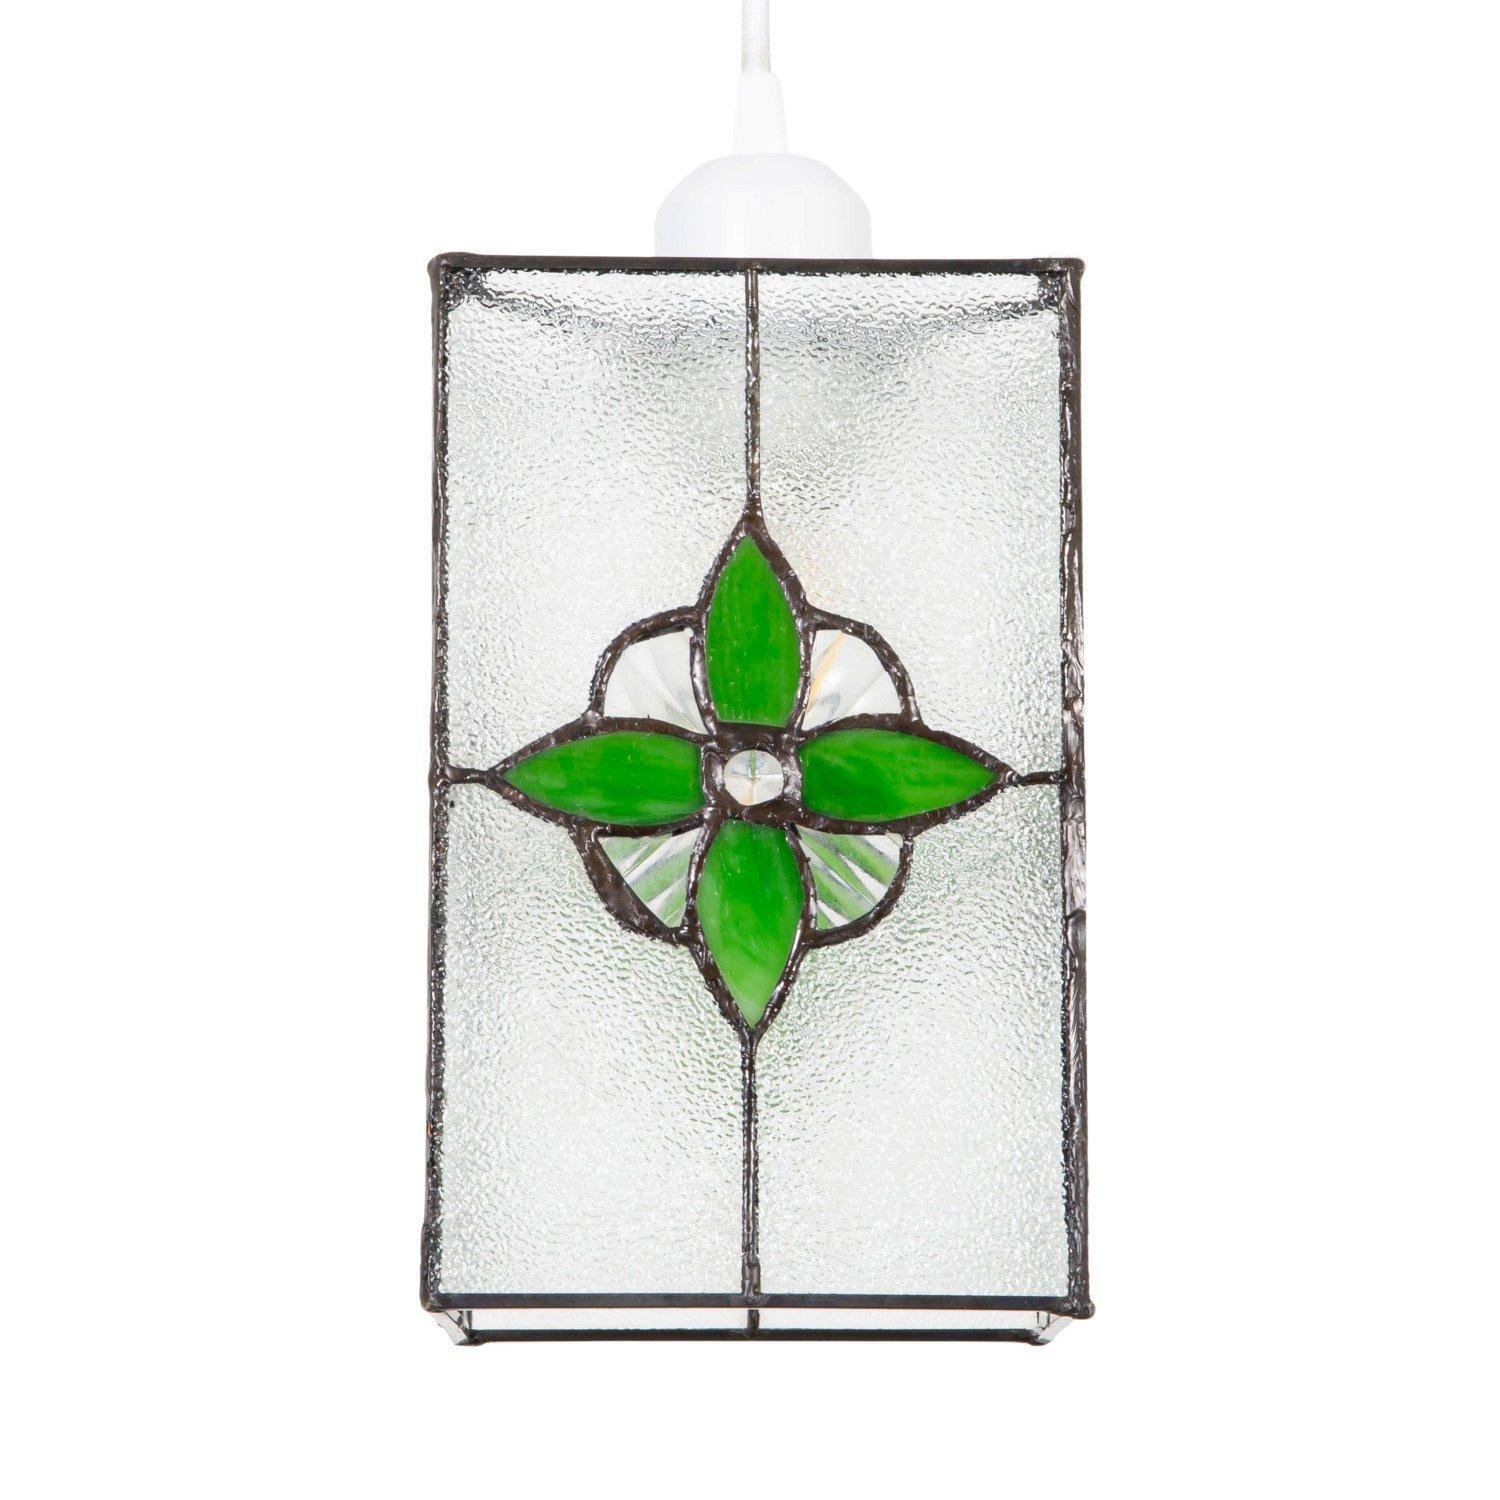 Traditional Clear Glass Tiffany Style Pendant Light Shade with Coloured Panels - image 1